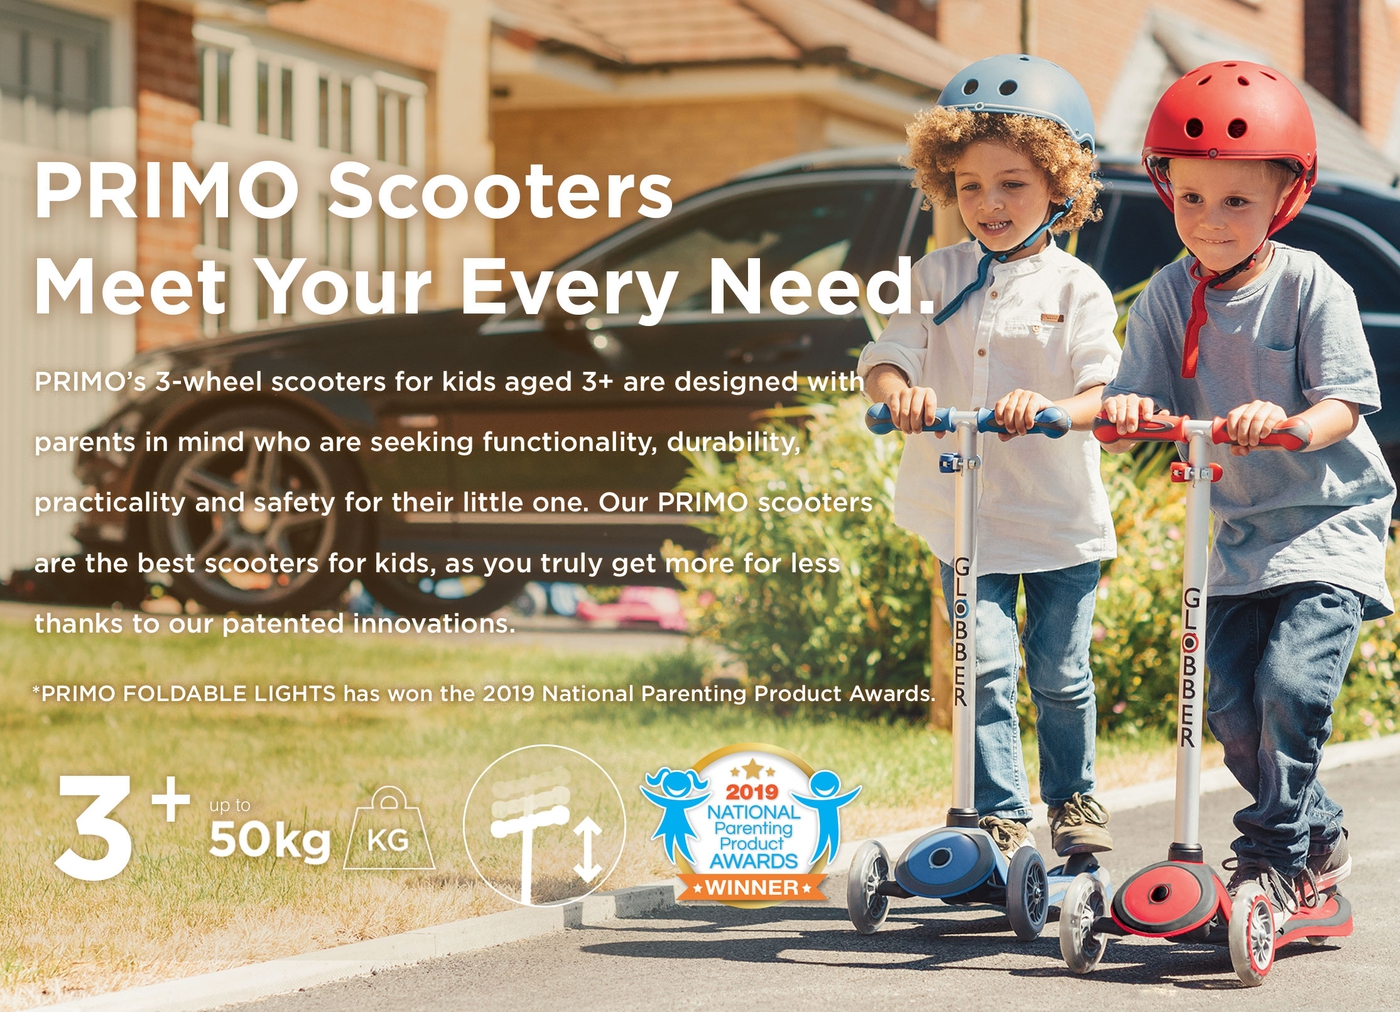 PRIMO Scooters Meet Your Every Need.